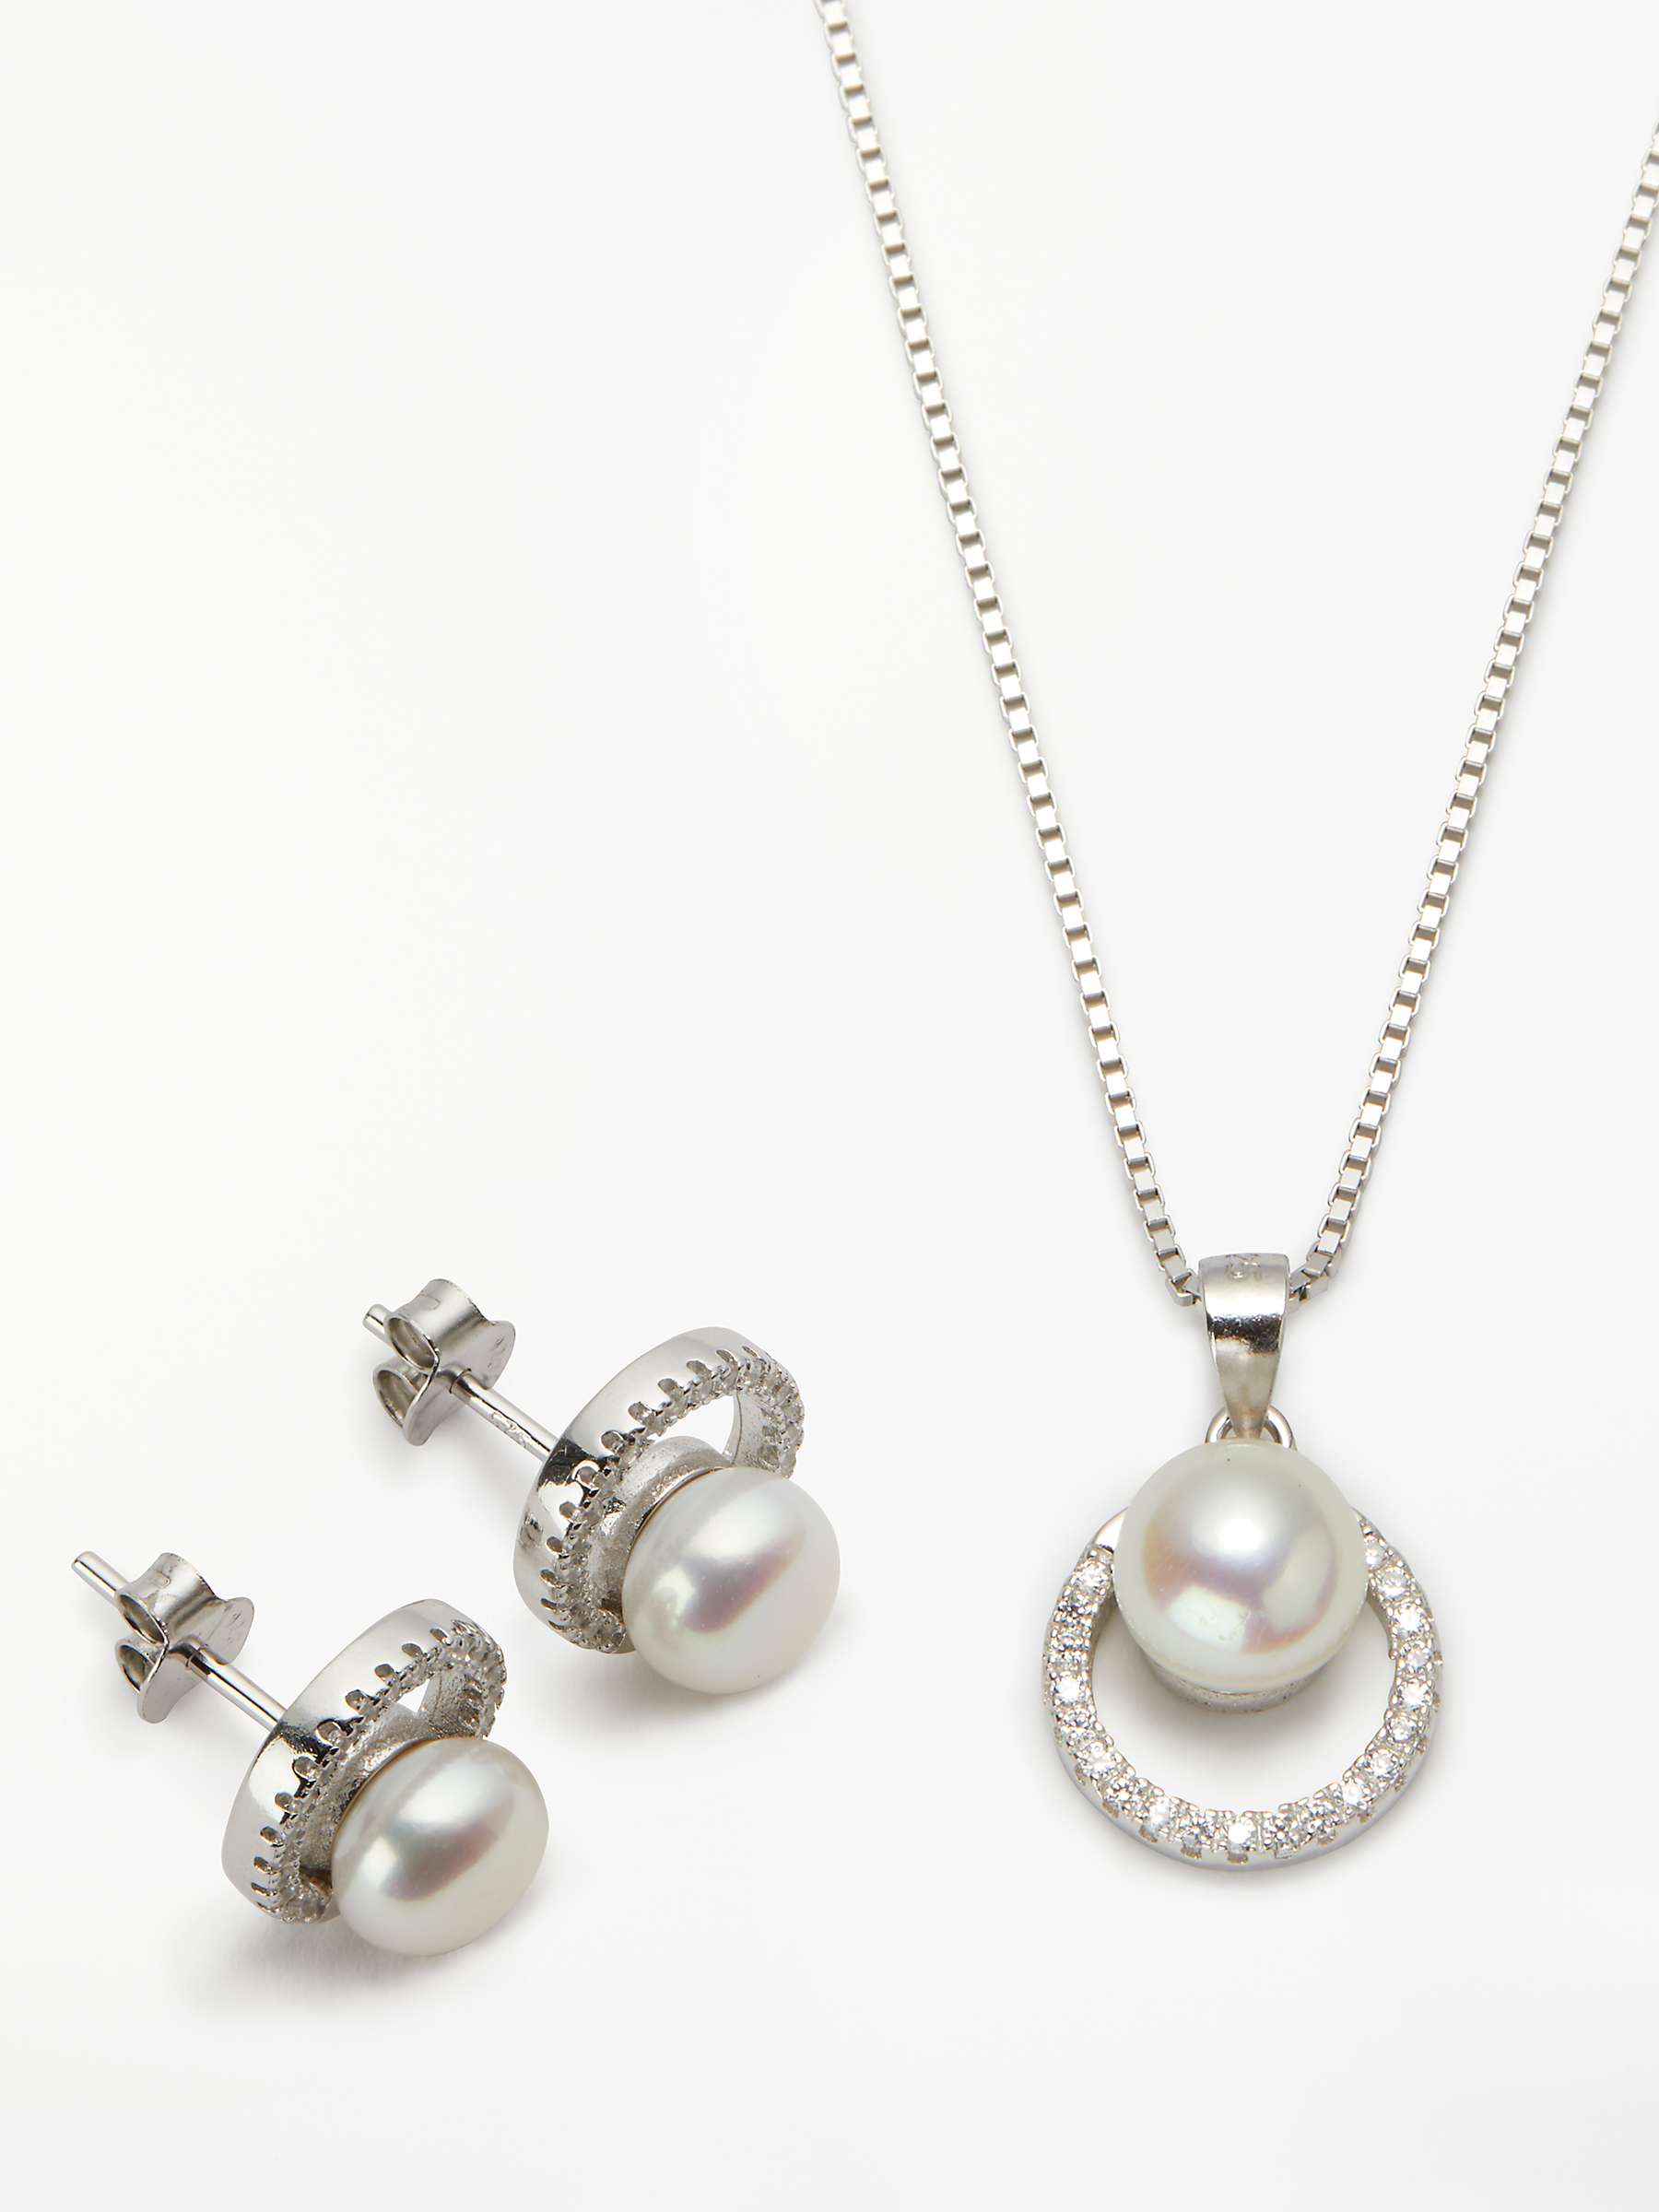 Buy Lido Crystal and Freshwater Pearl Round Stud Earrings and Pendant Necklace Jewellery Set, Silver Online at johnlewis.com